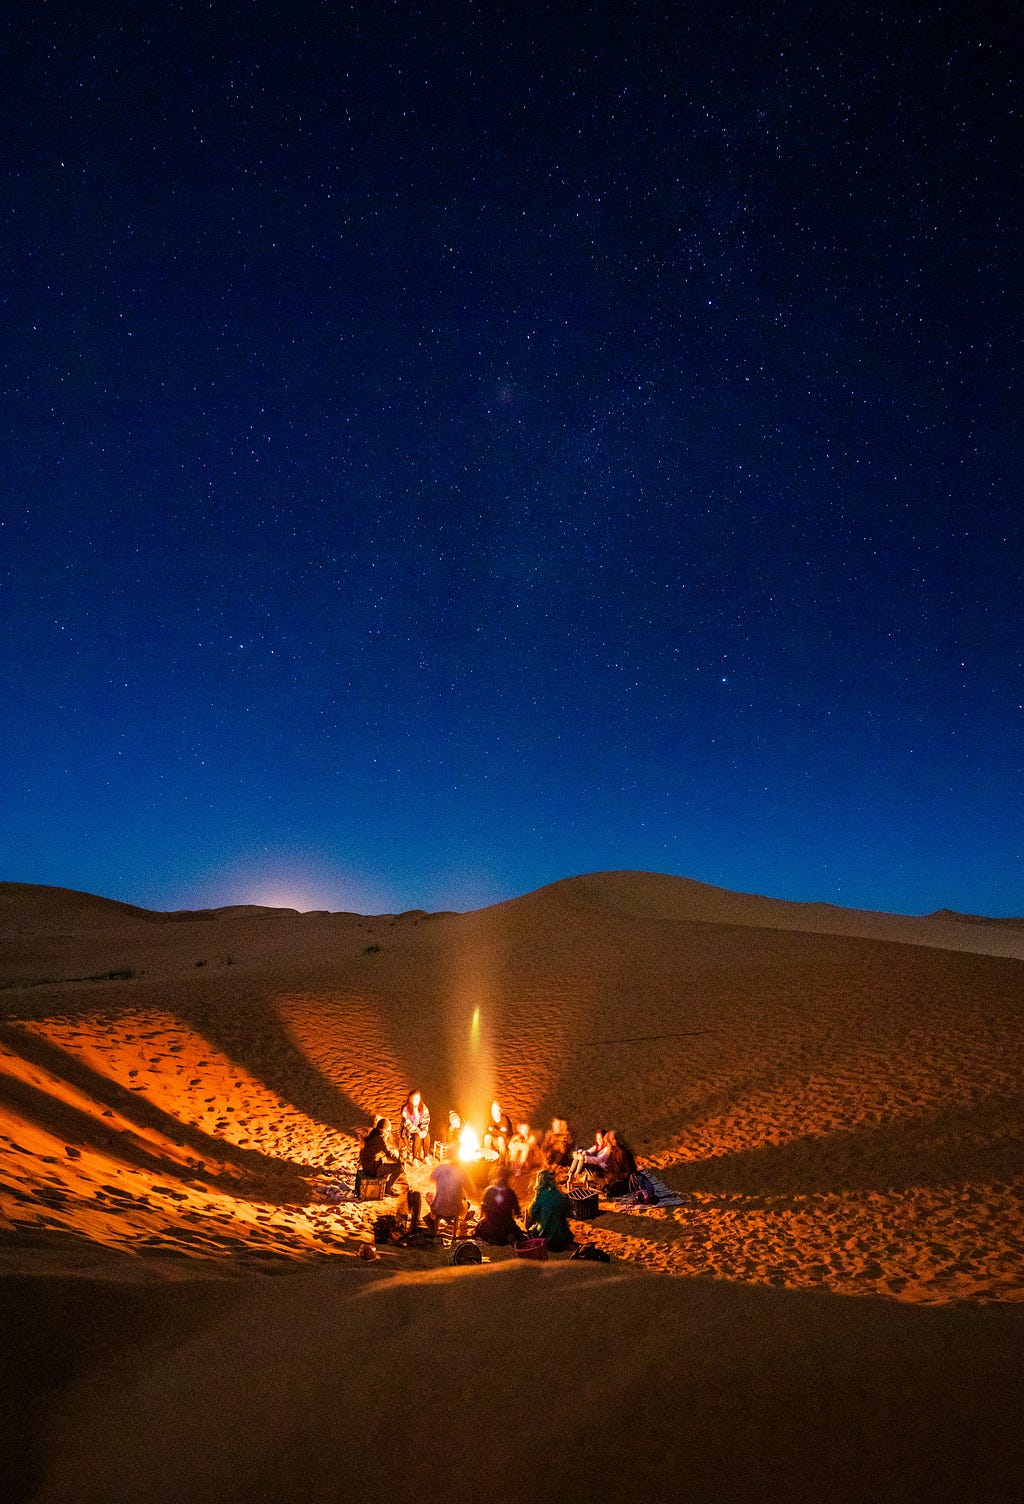 A night sky in the desert with people sitting around a campfire.